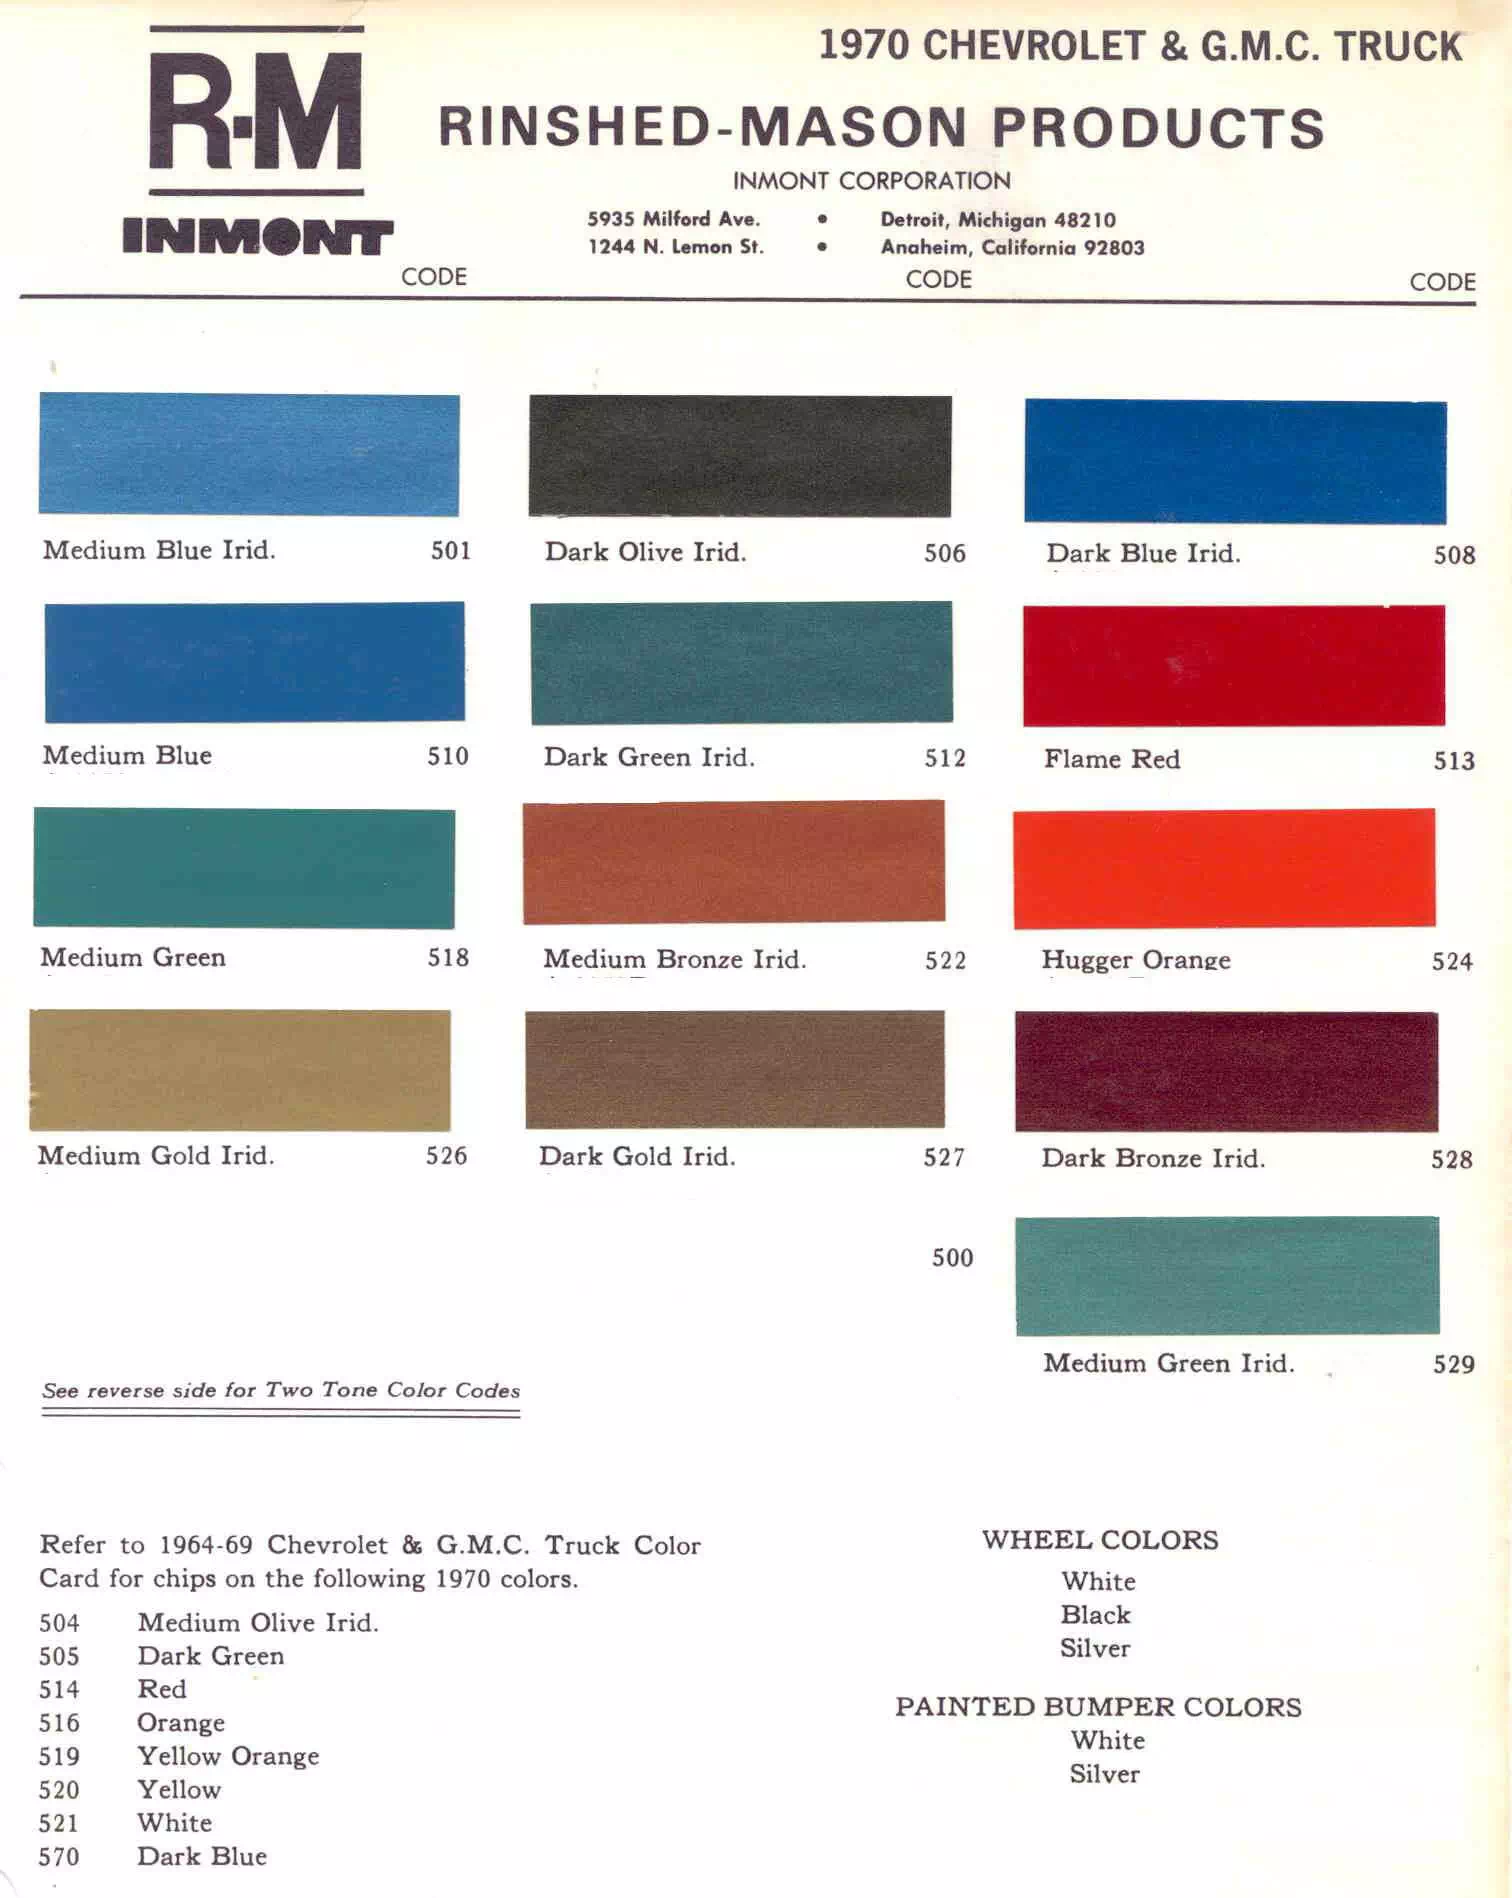 Paint code for 1970 General motors vehicles so that you can order the right color